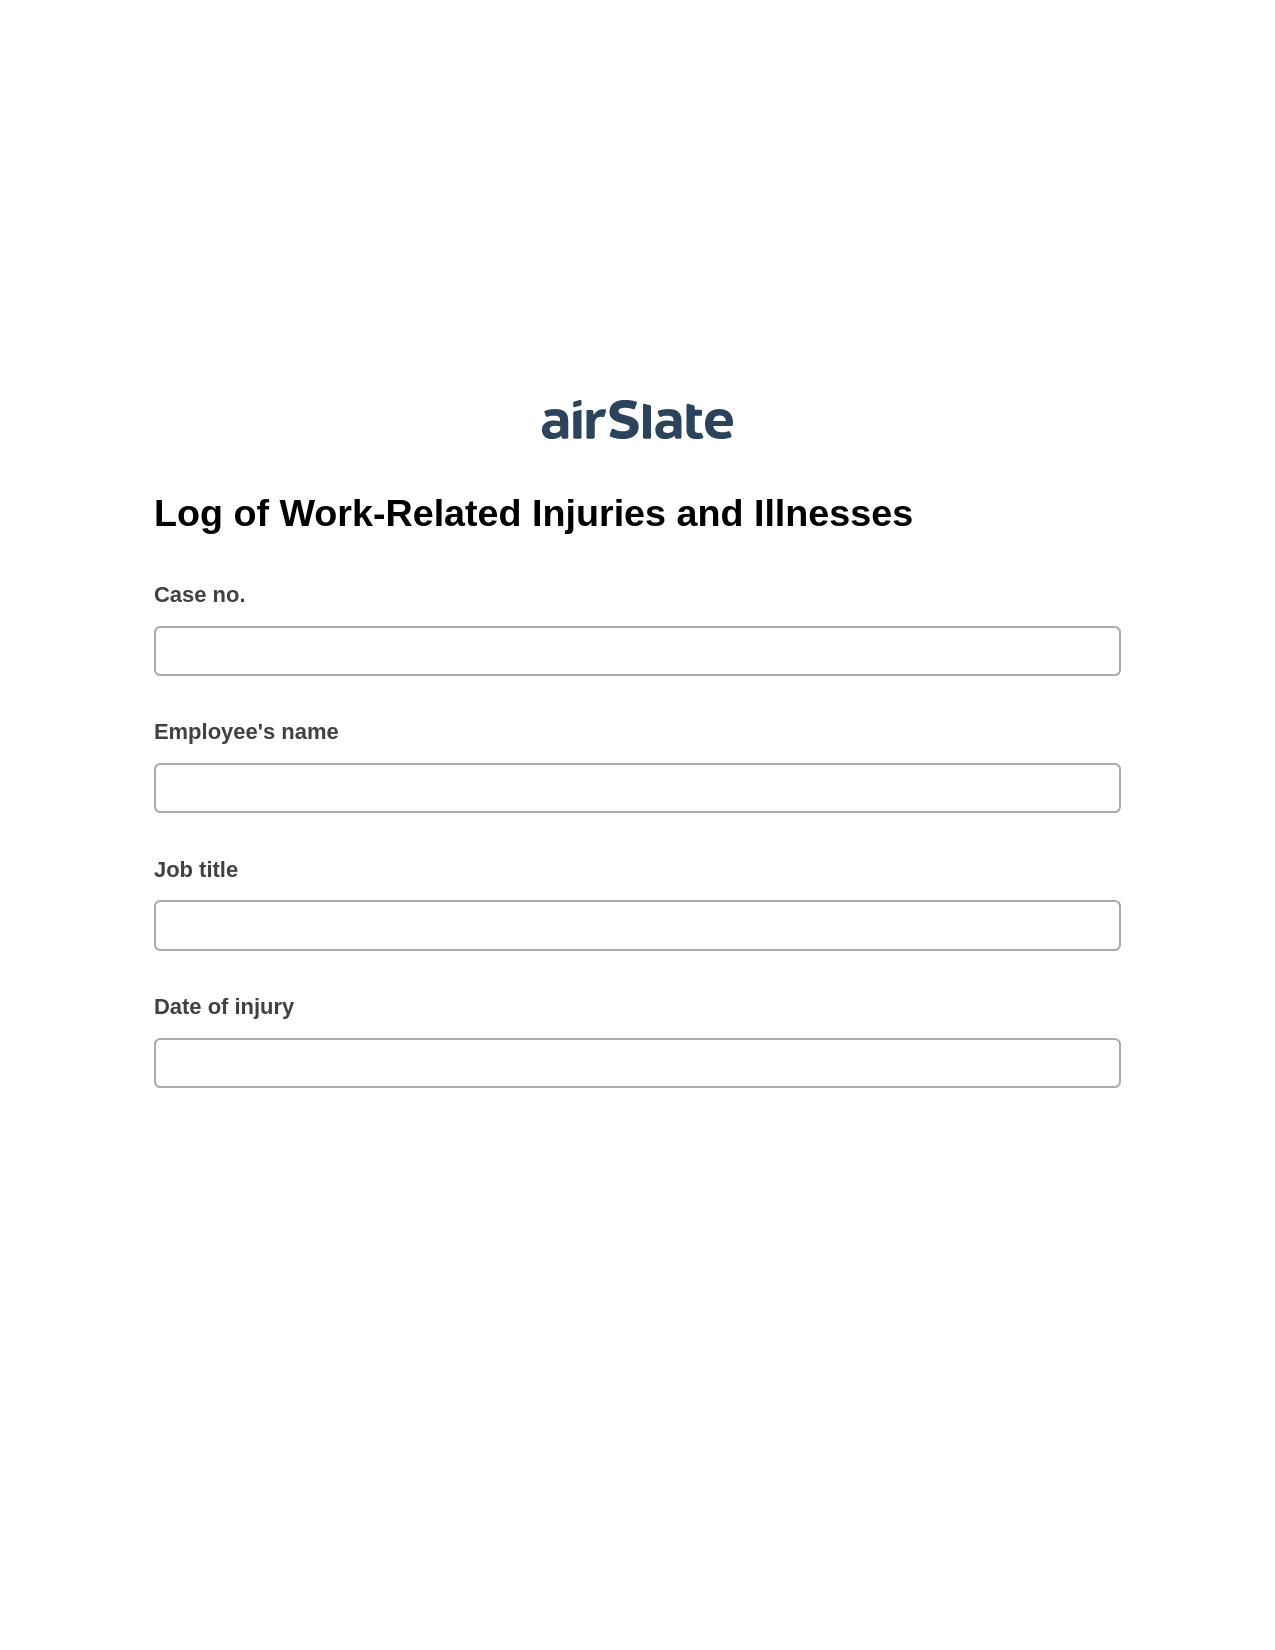 Multirole Log of Work-Related Injuries and Illnesses Pre-fill Dropdowns from Office 365 Excel Bot, SendGrid send Campaign bot, Slack Notification Postfinish Bot